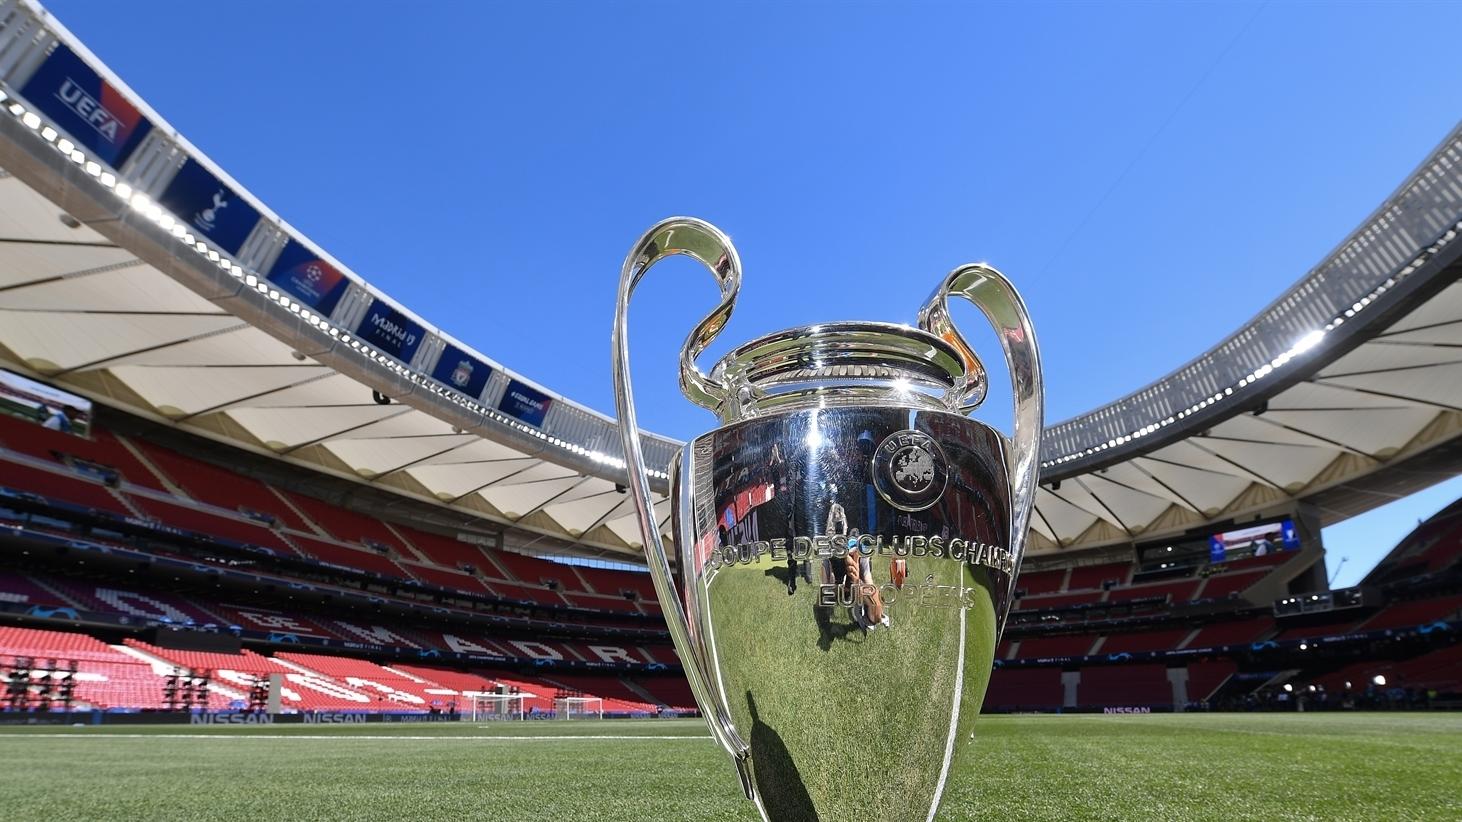 UEFA Champions League Final to take place on 29 August